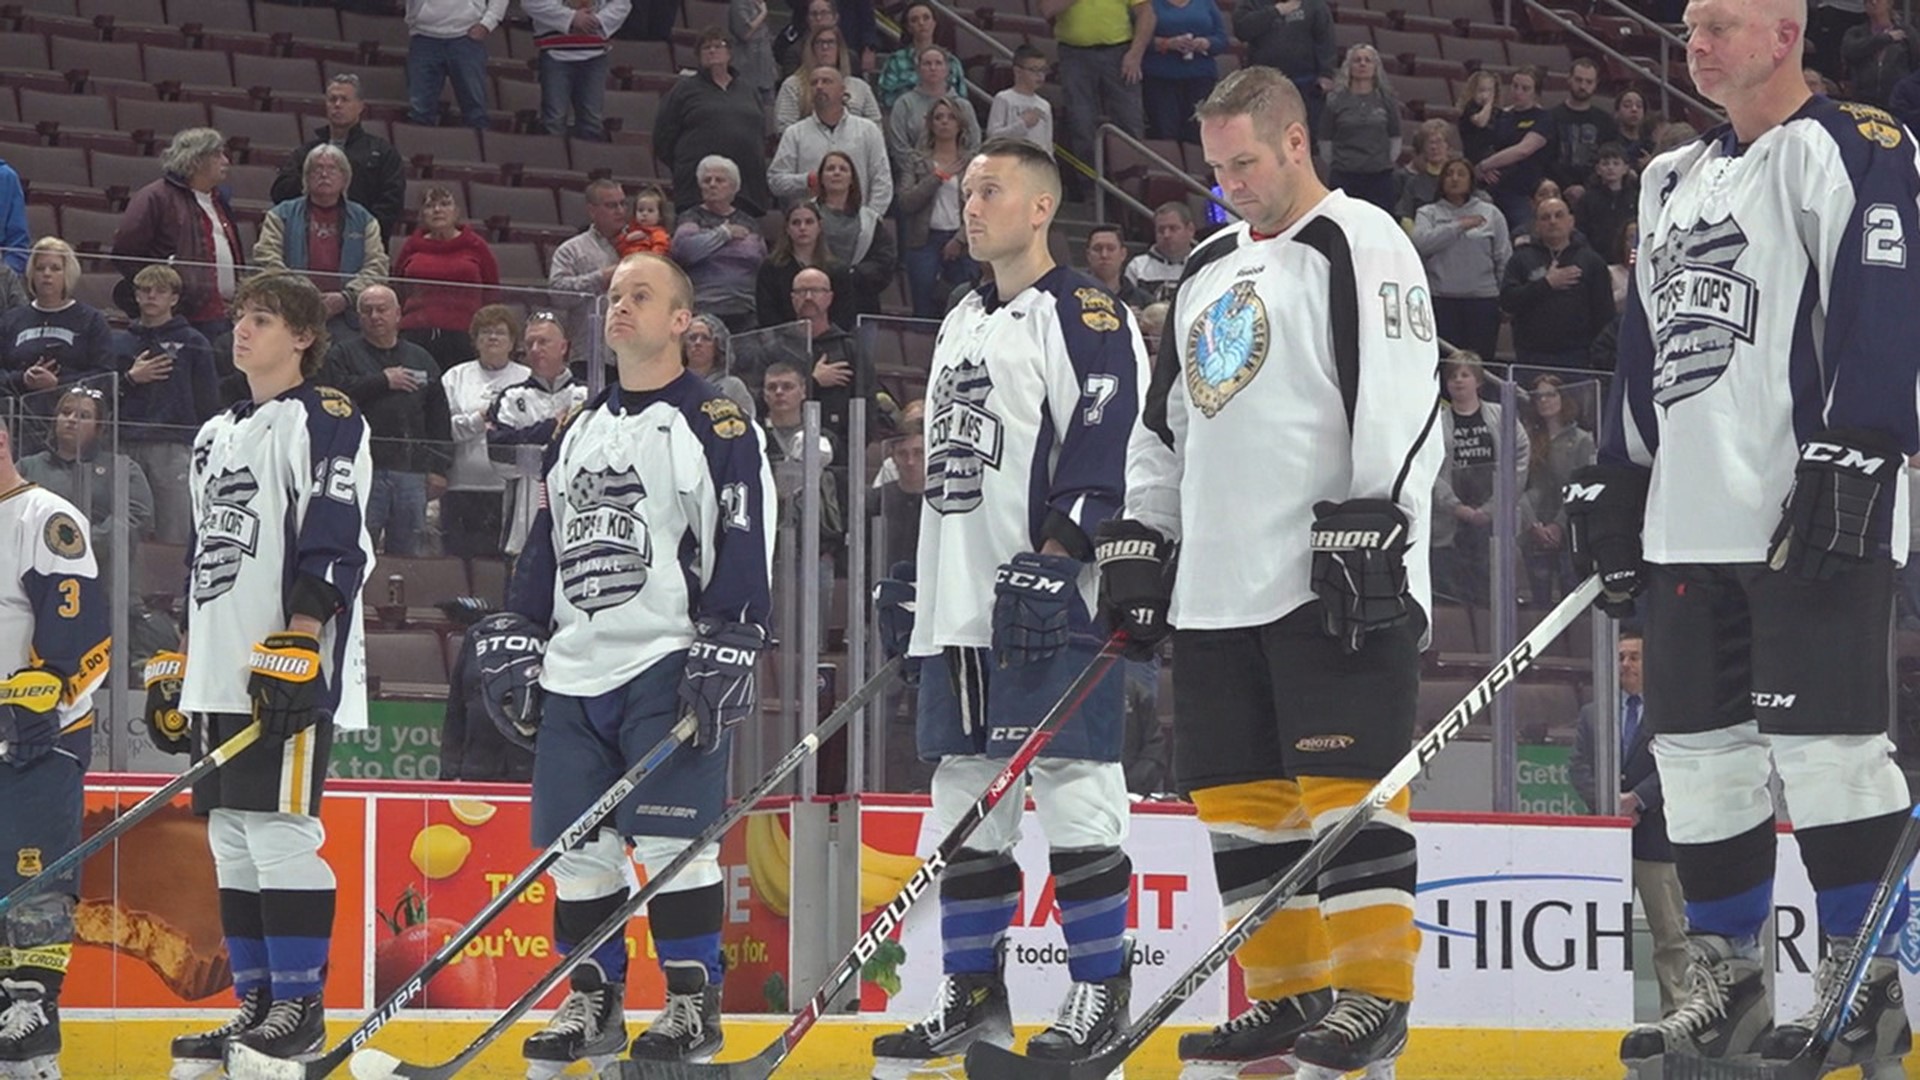 The charity hockey game raises money for families of fallen police officers.